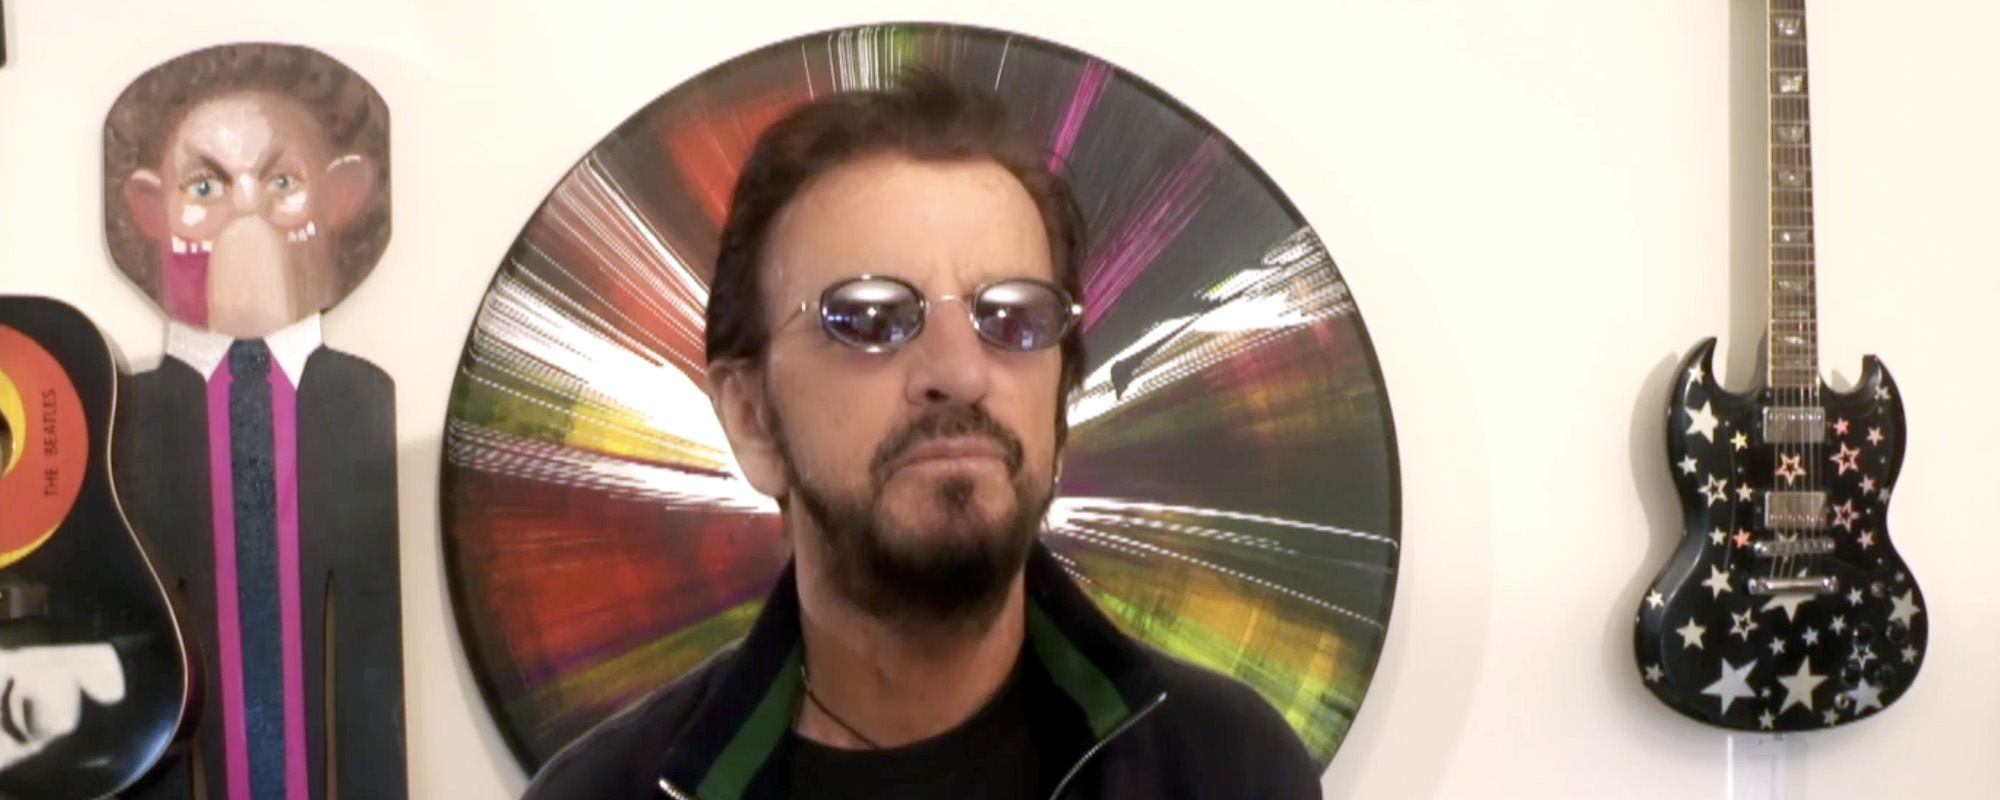 The Beatles’ Ringo Starr Releasing New Book, ‘Beats & Threads,’ Celebrating His Drum Kits and Iconic Outfits